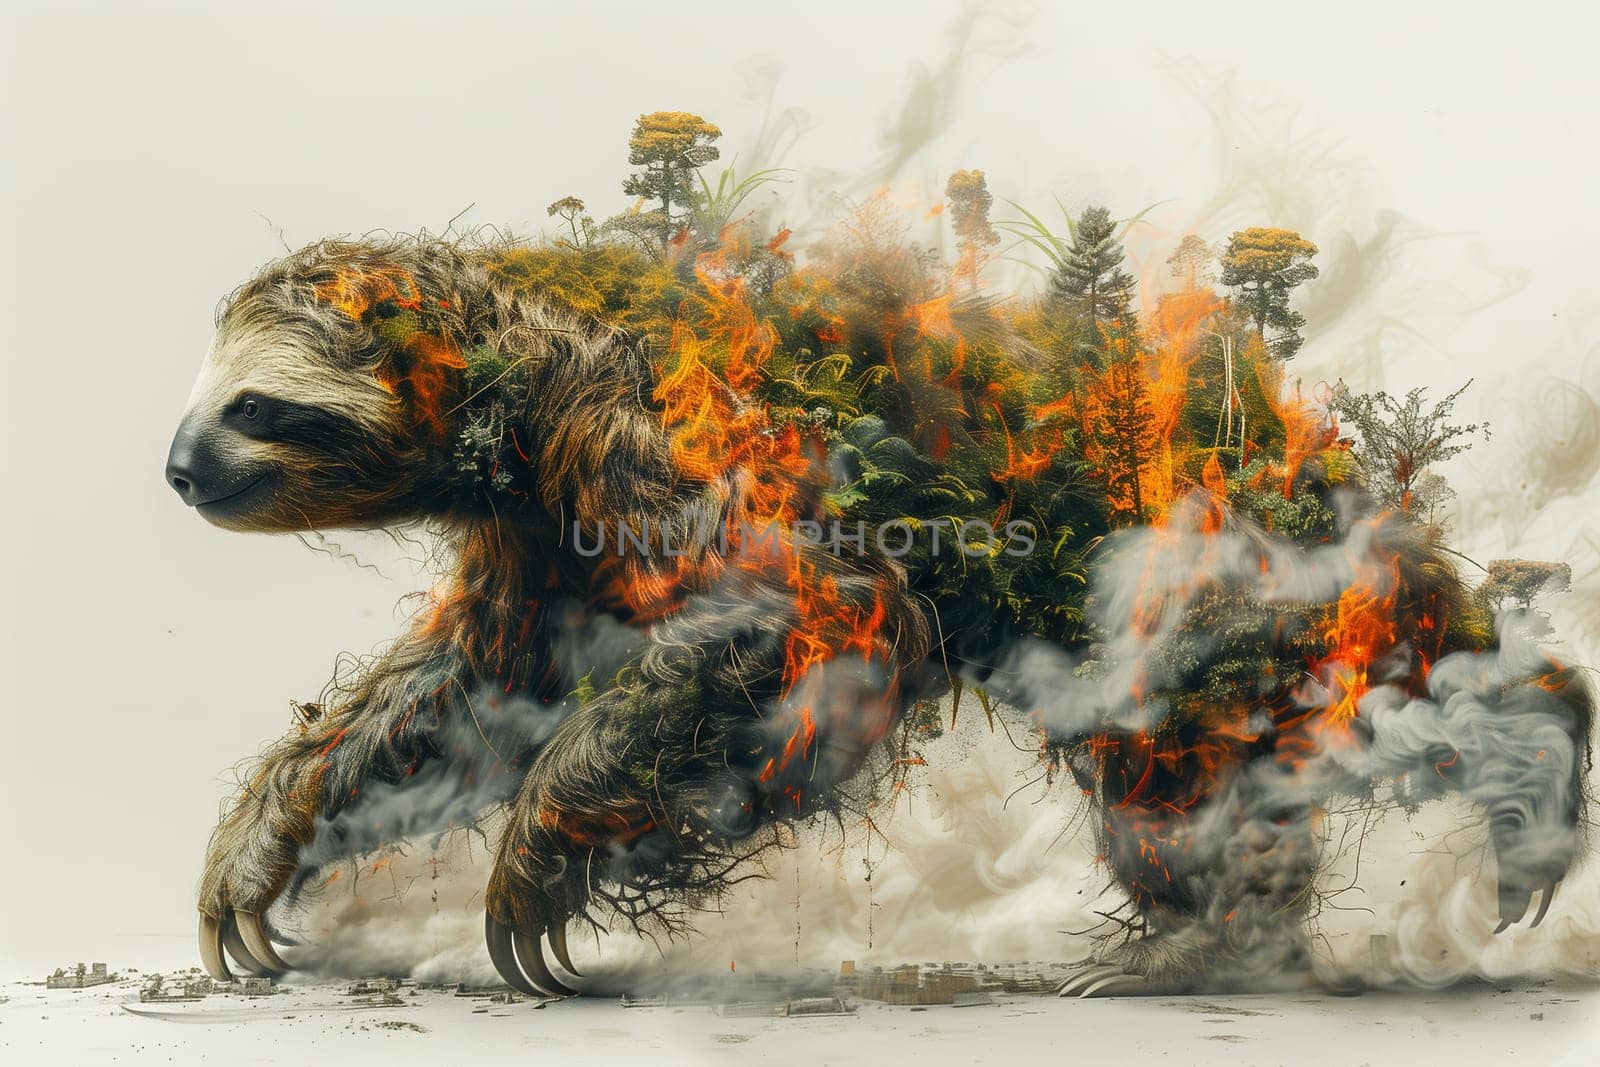 A surreal artwork shows a sloth with a forest on its back burning, highlighting the impact of wildfires on wildlife.